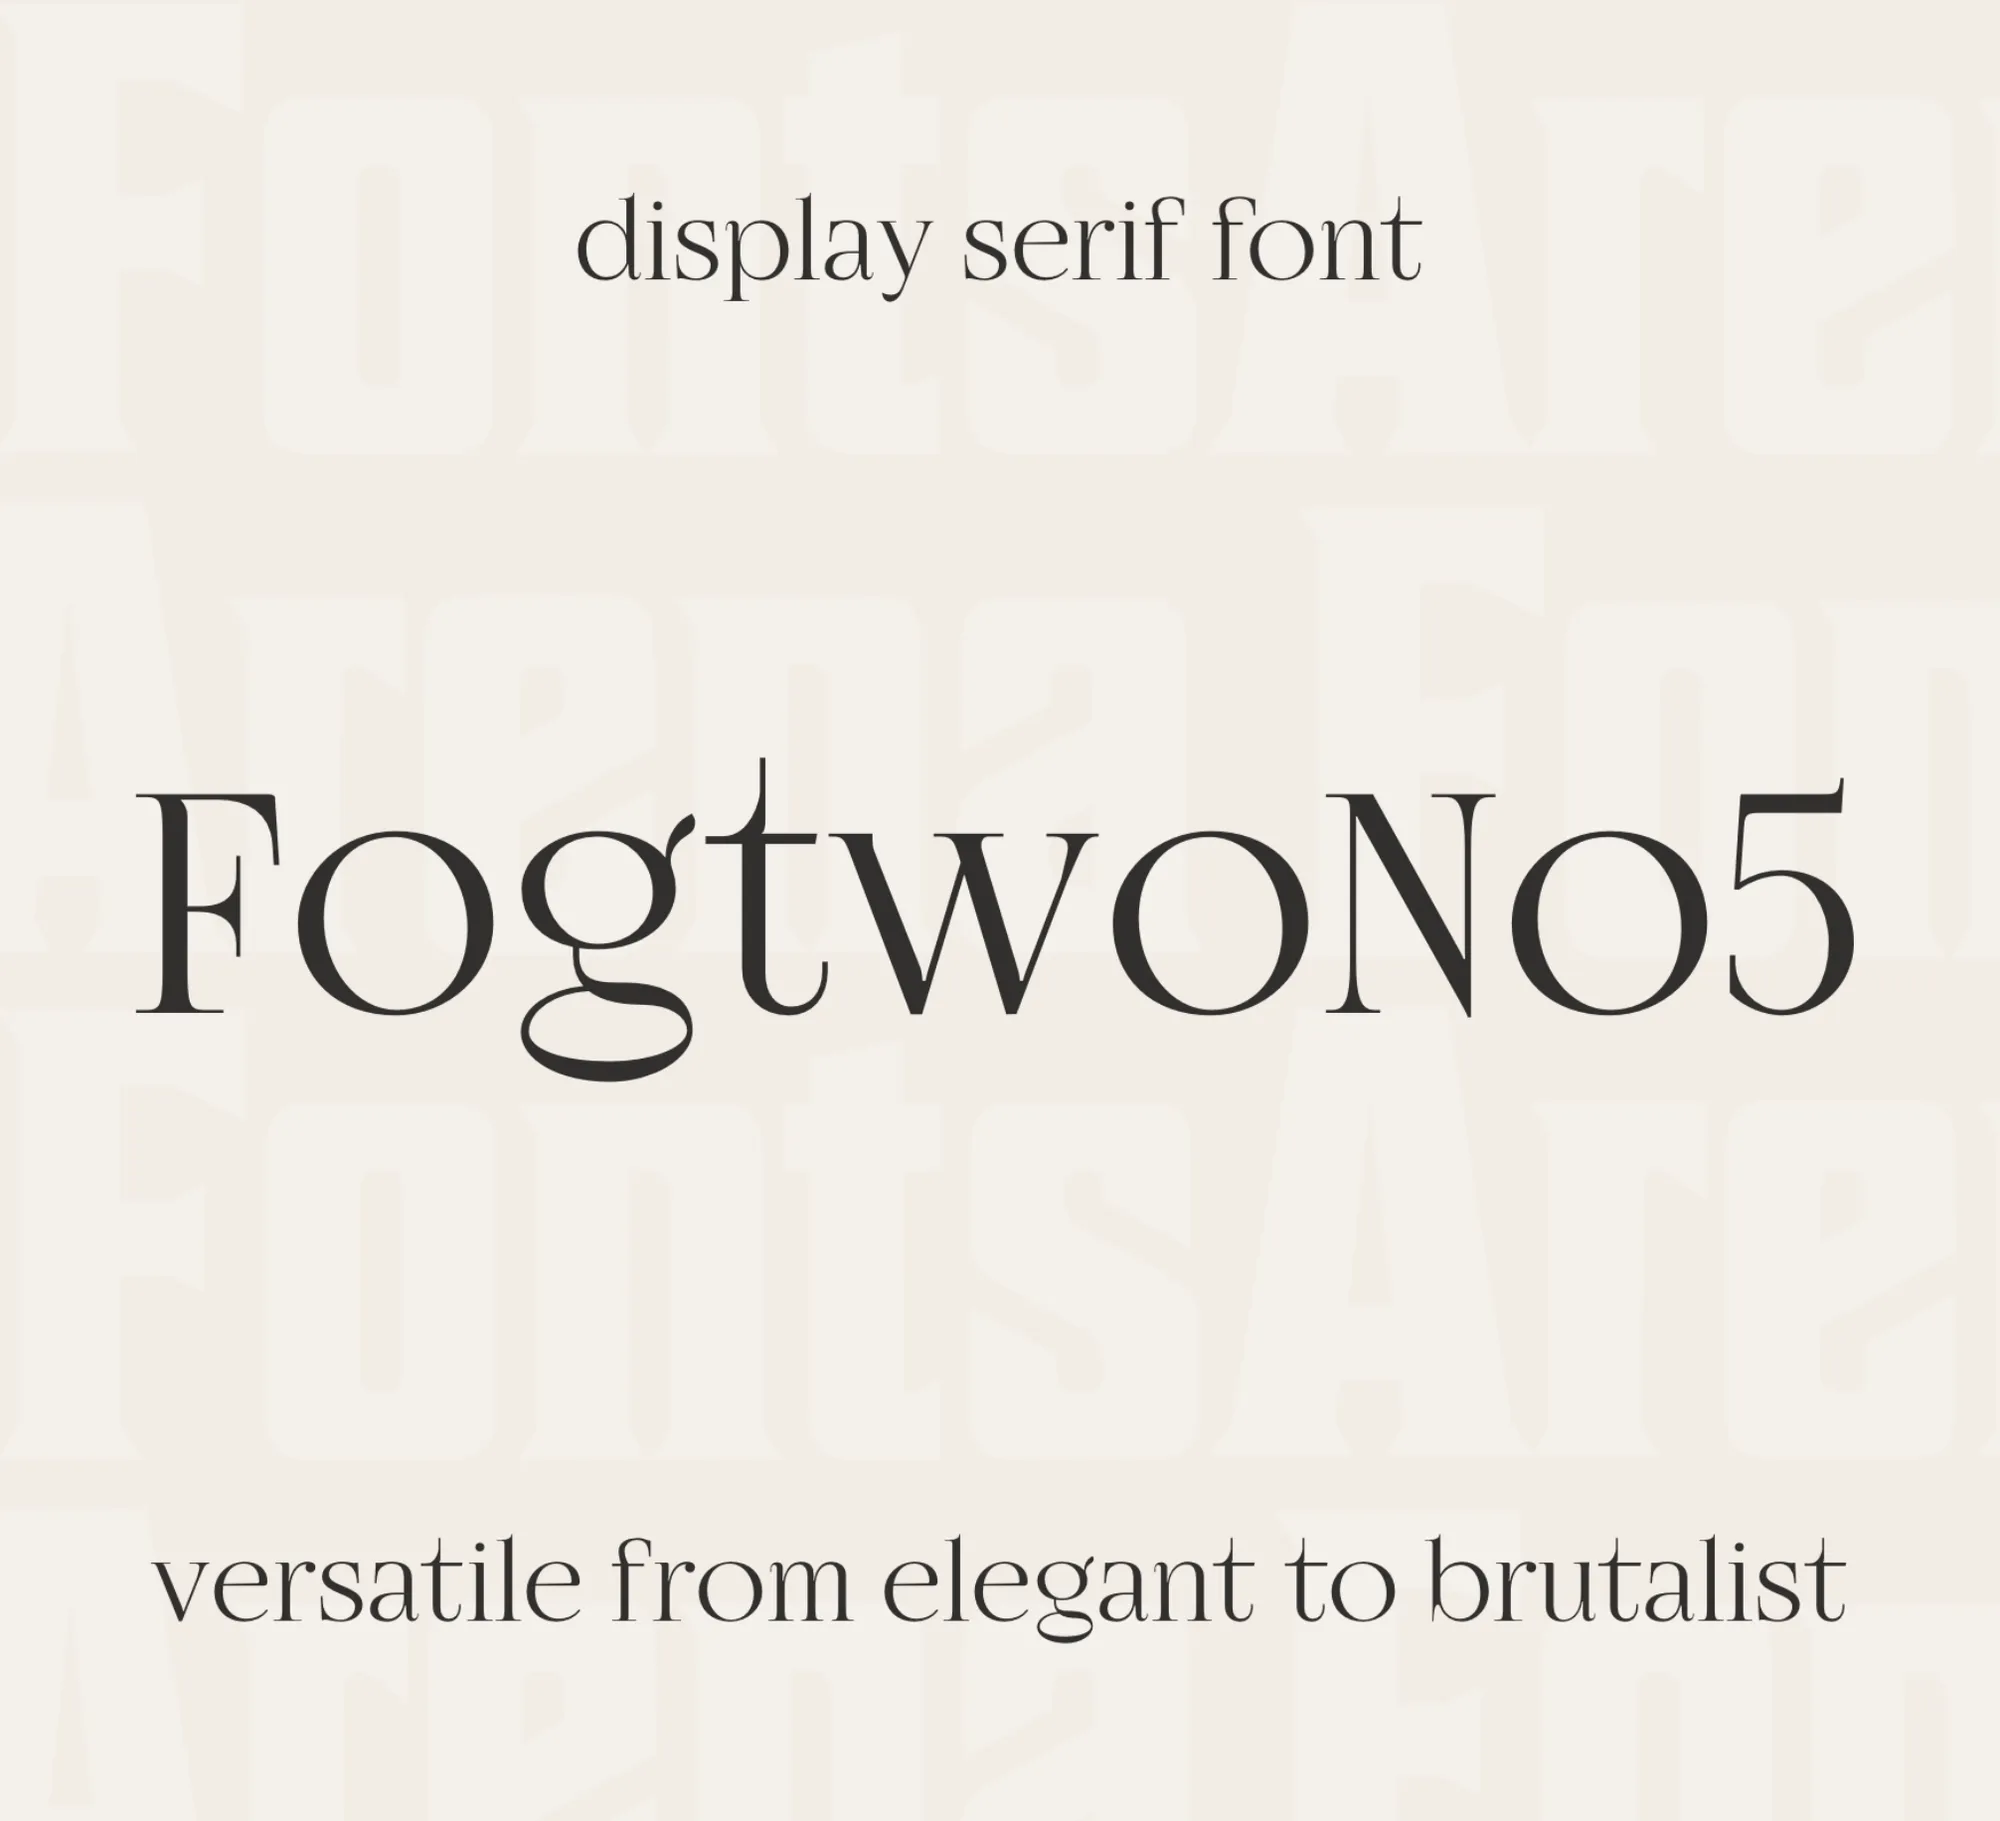 Fogtwo No5 Typeface